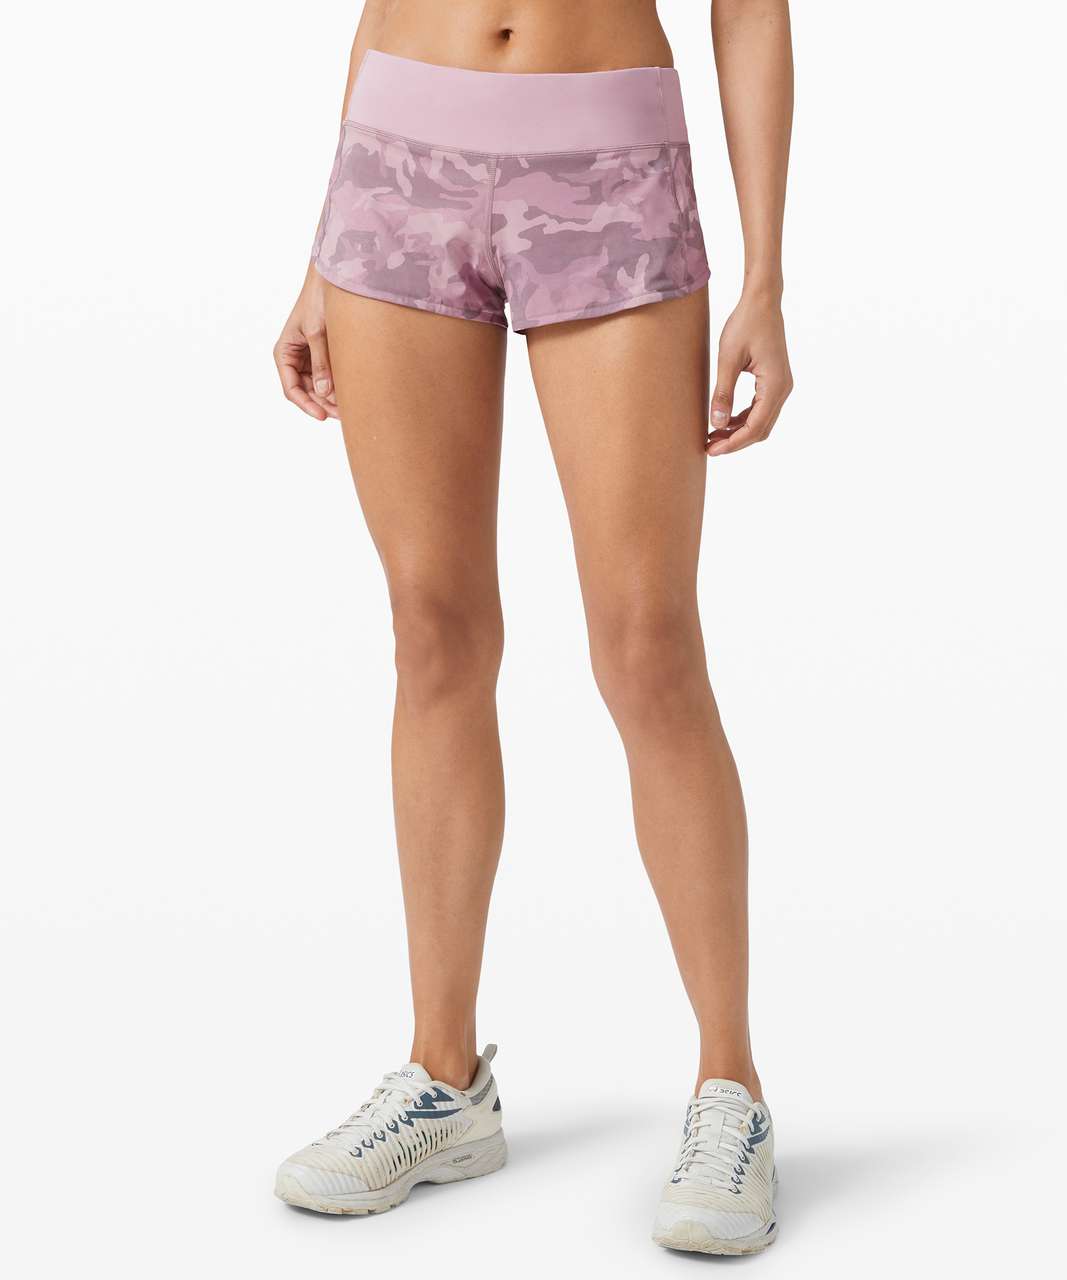 Lululemon Speed Up Short *2.5" - Incognito Camo Pink Taupe Multi / Pink Taupe